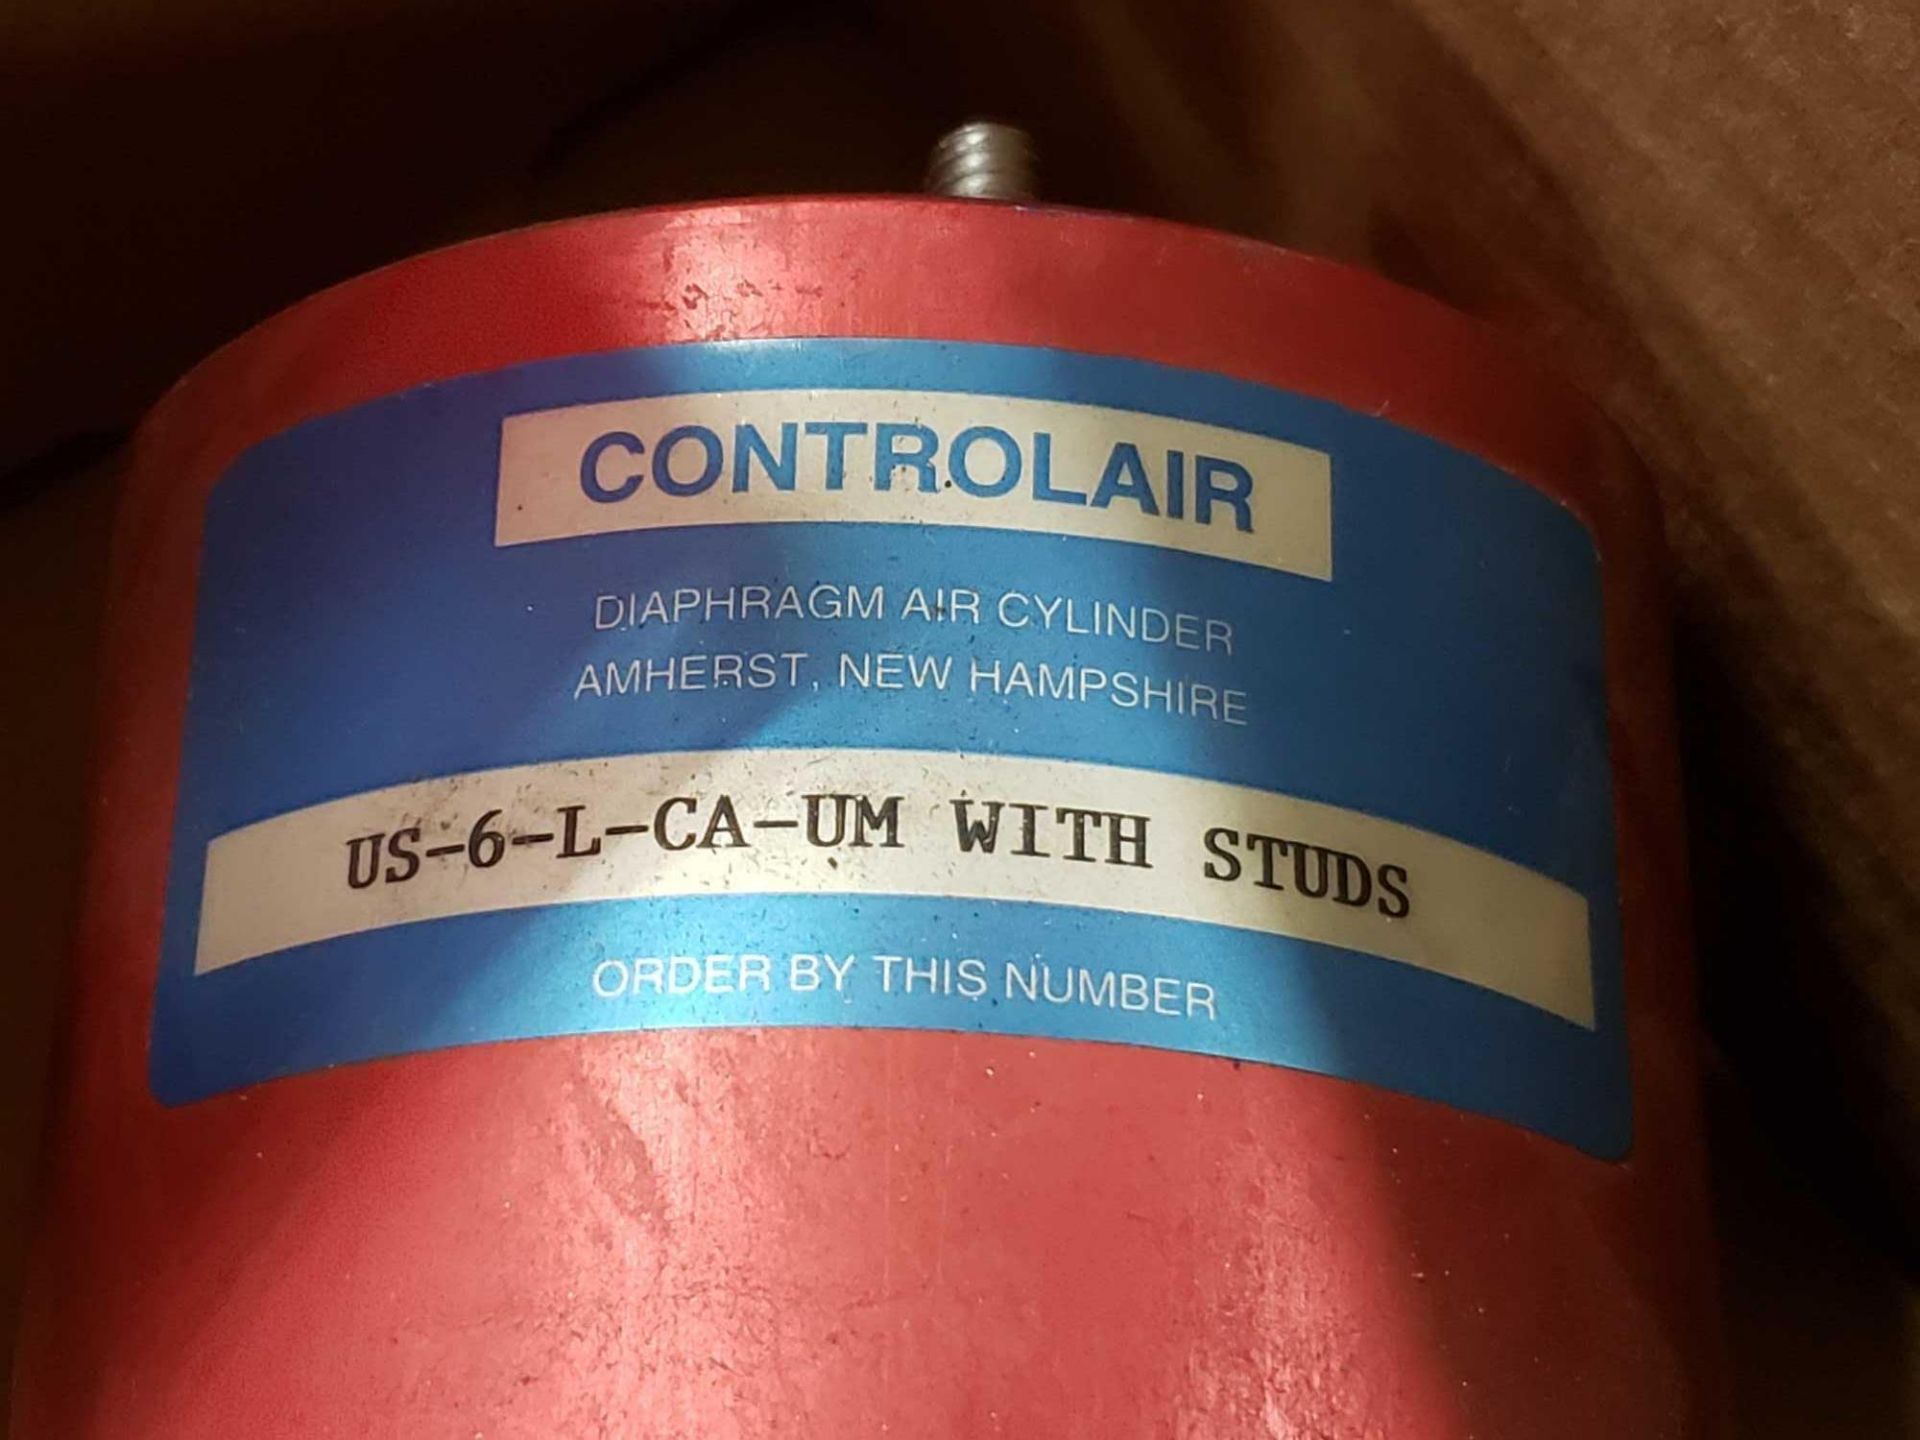 Controlair diaphragm air cylinder. Model US-6-L-CA-UM. New as pictured. - Image 2 of 2